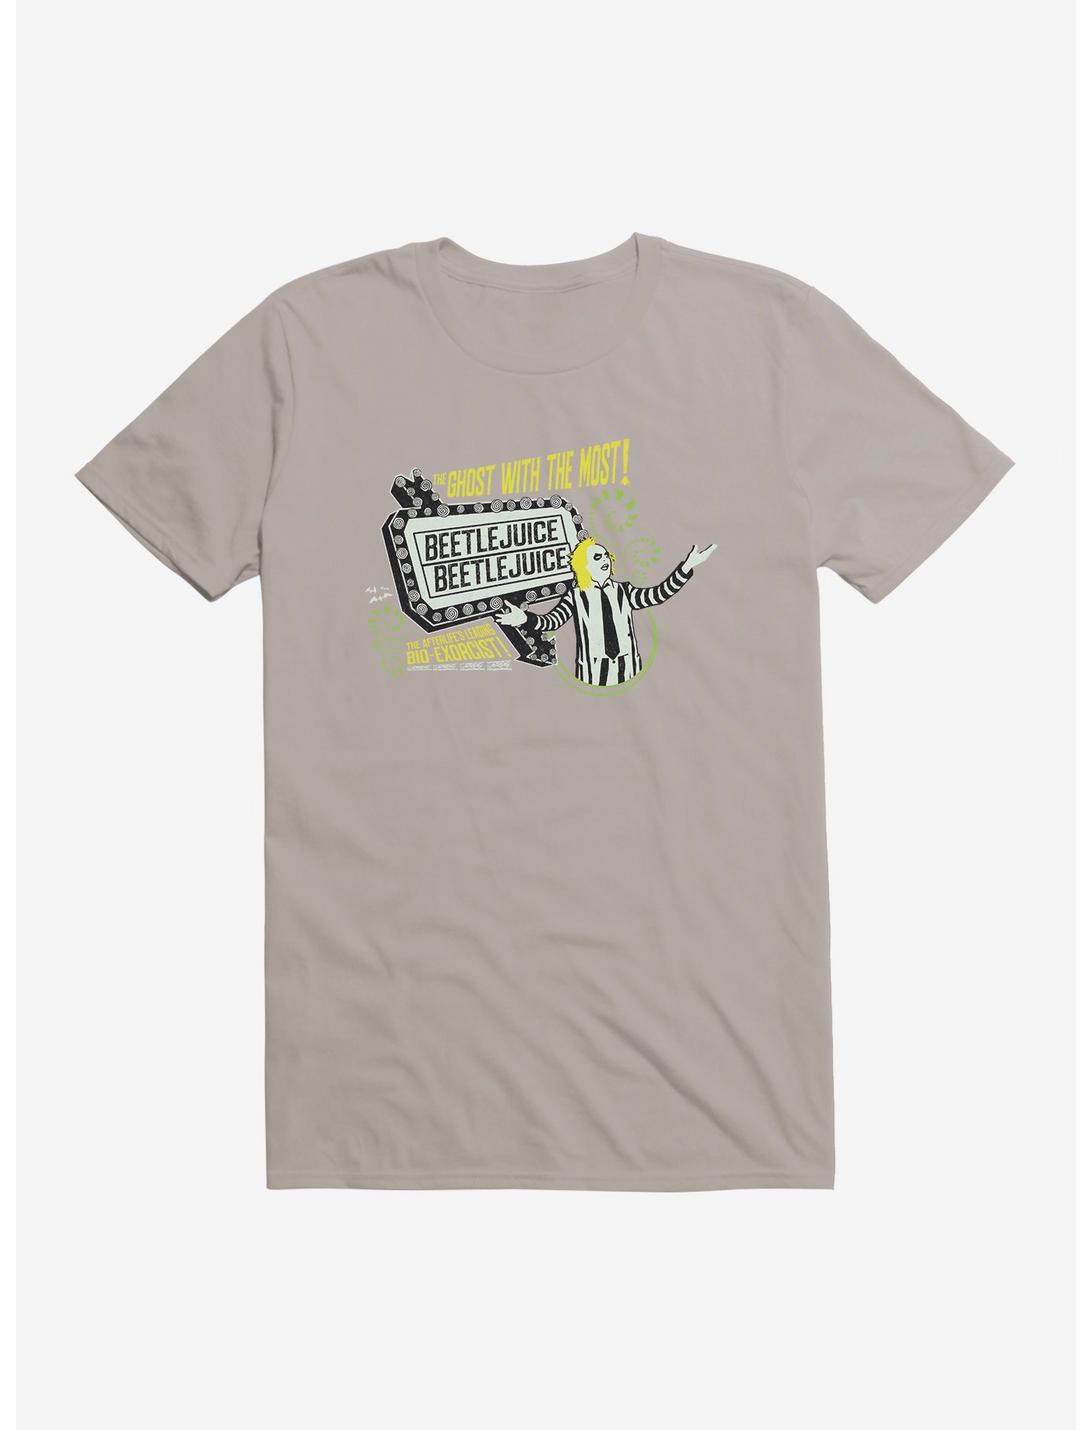 Beetlejuice Ghost With Most T-Shirt, LIGHT GREY, hi-res